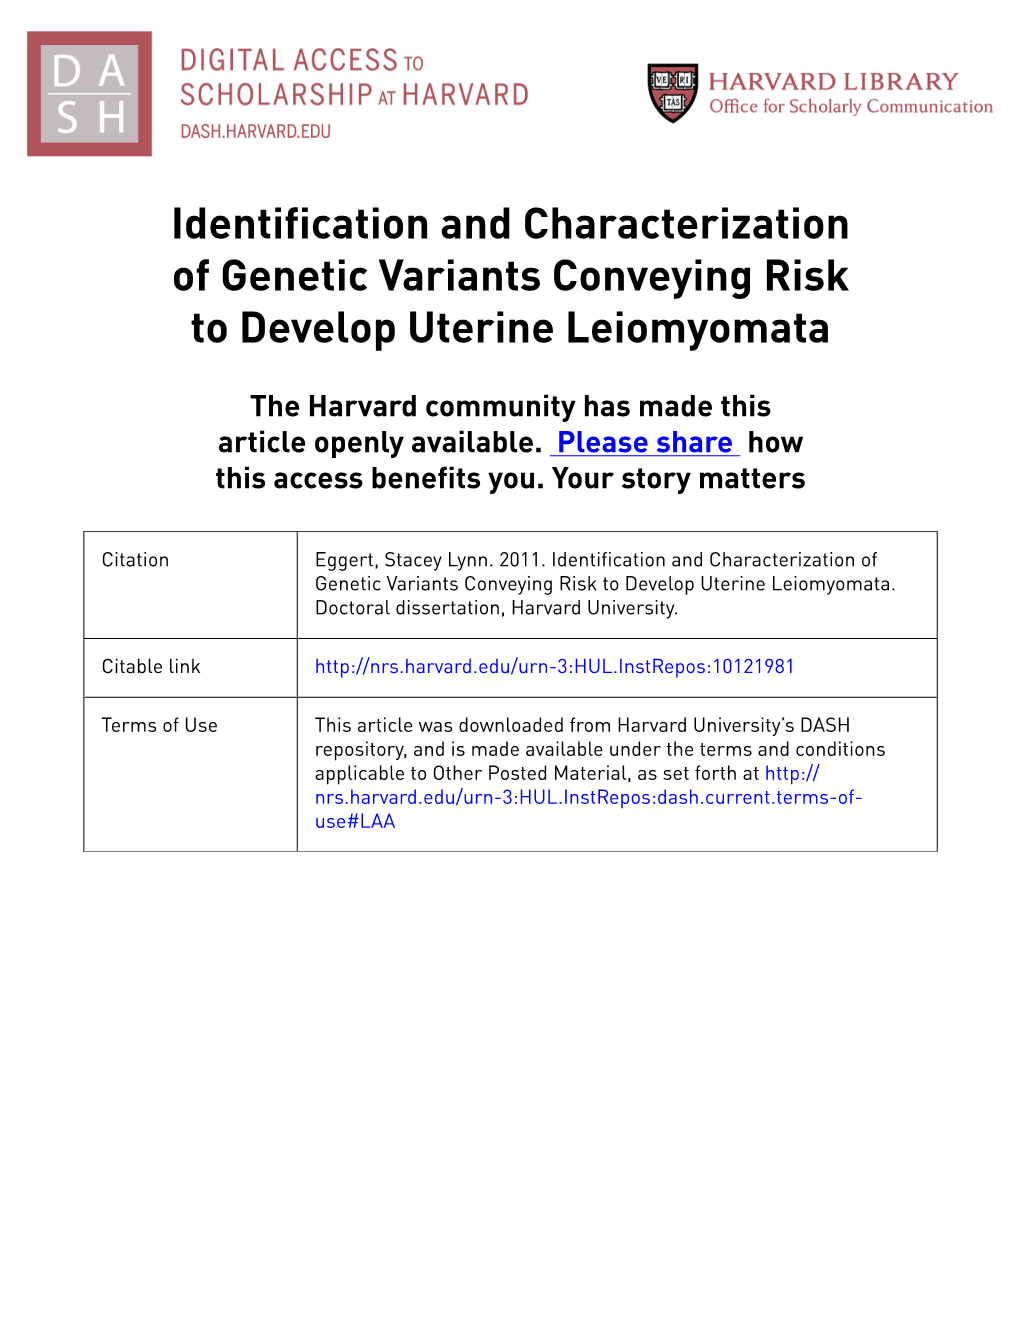 Identification and Characterization of Genetic Variants Conveying Risk to Develop Uterine Leiomyomata